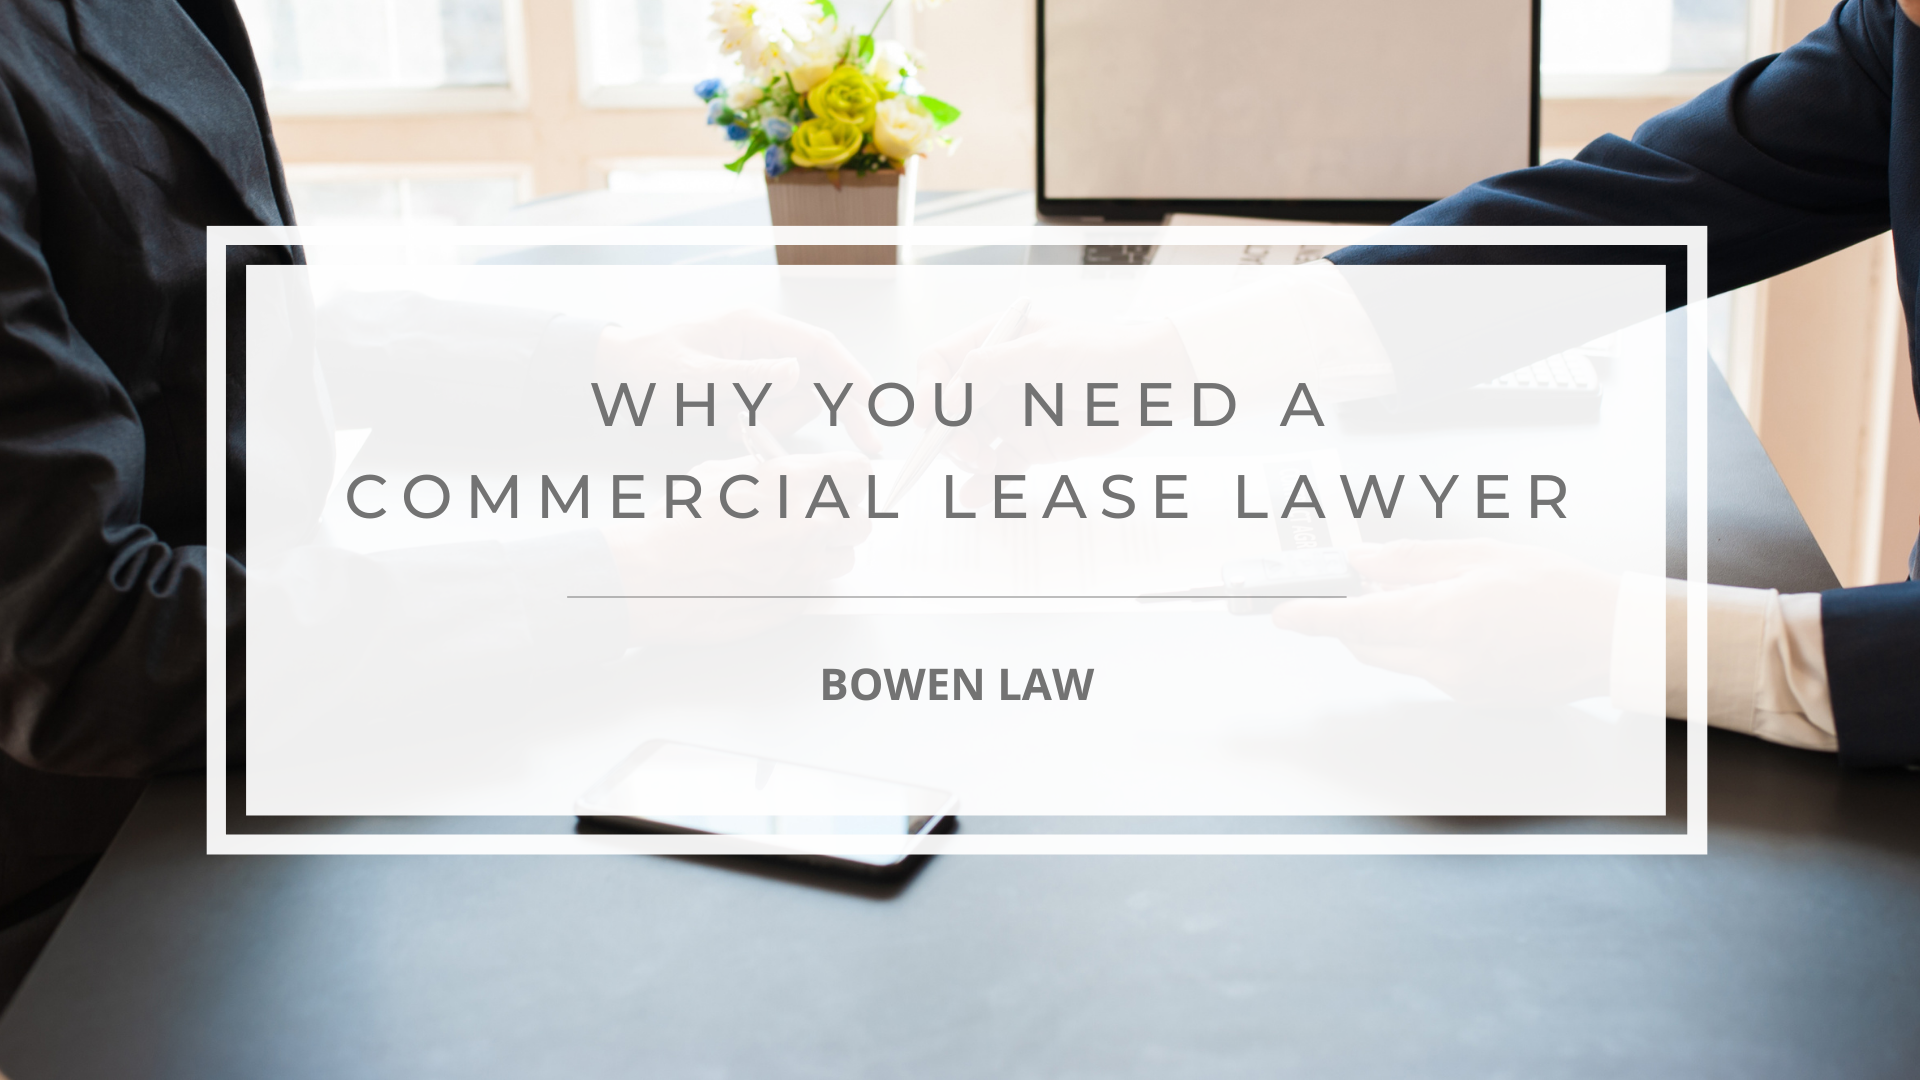 Featured image of why you need a commercial lease lawyer